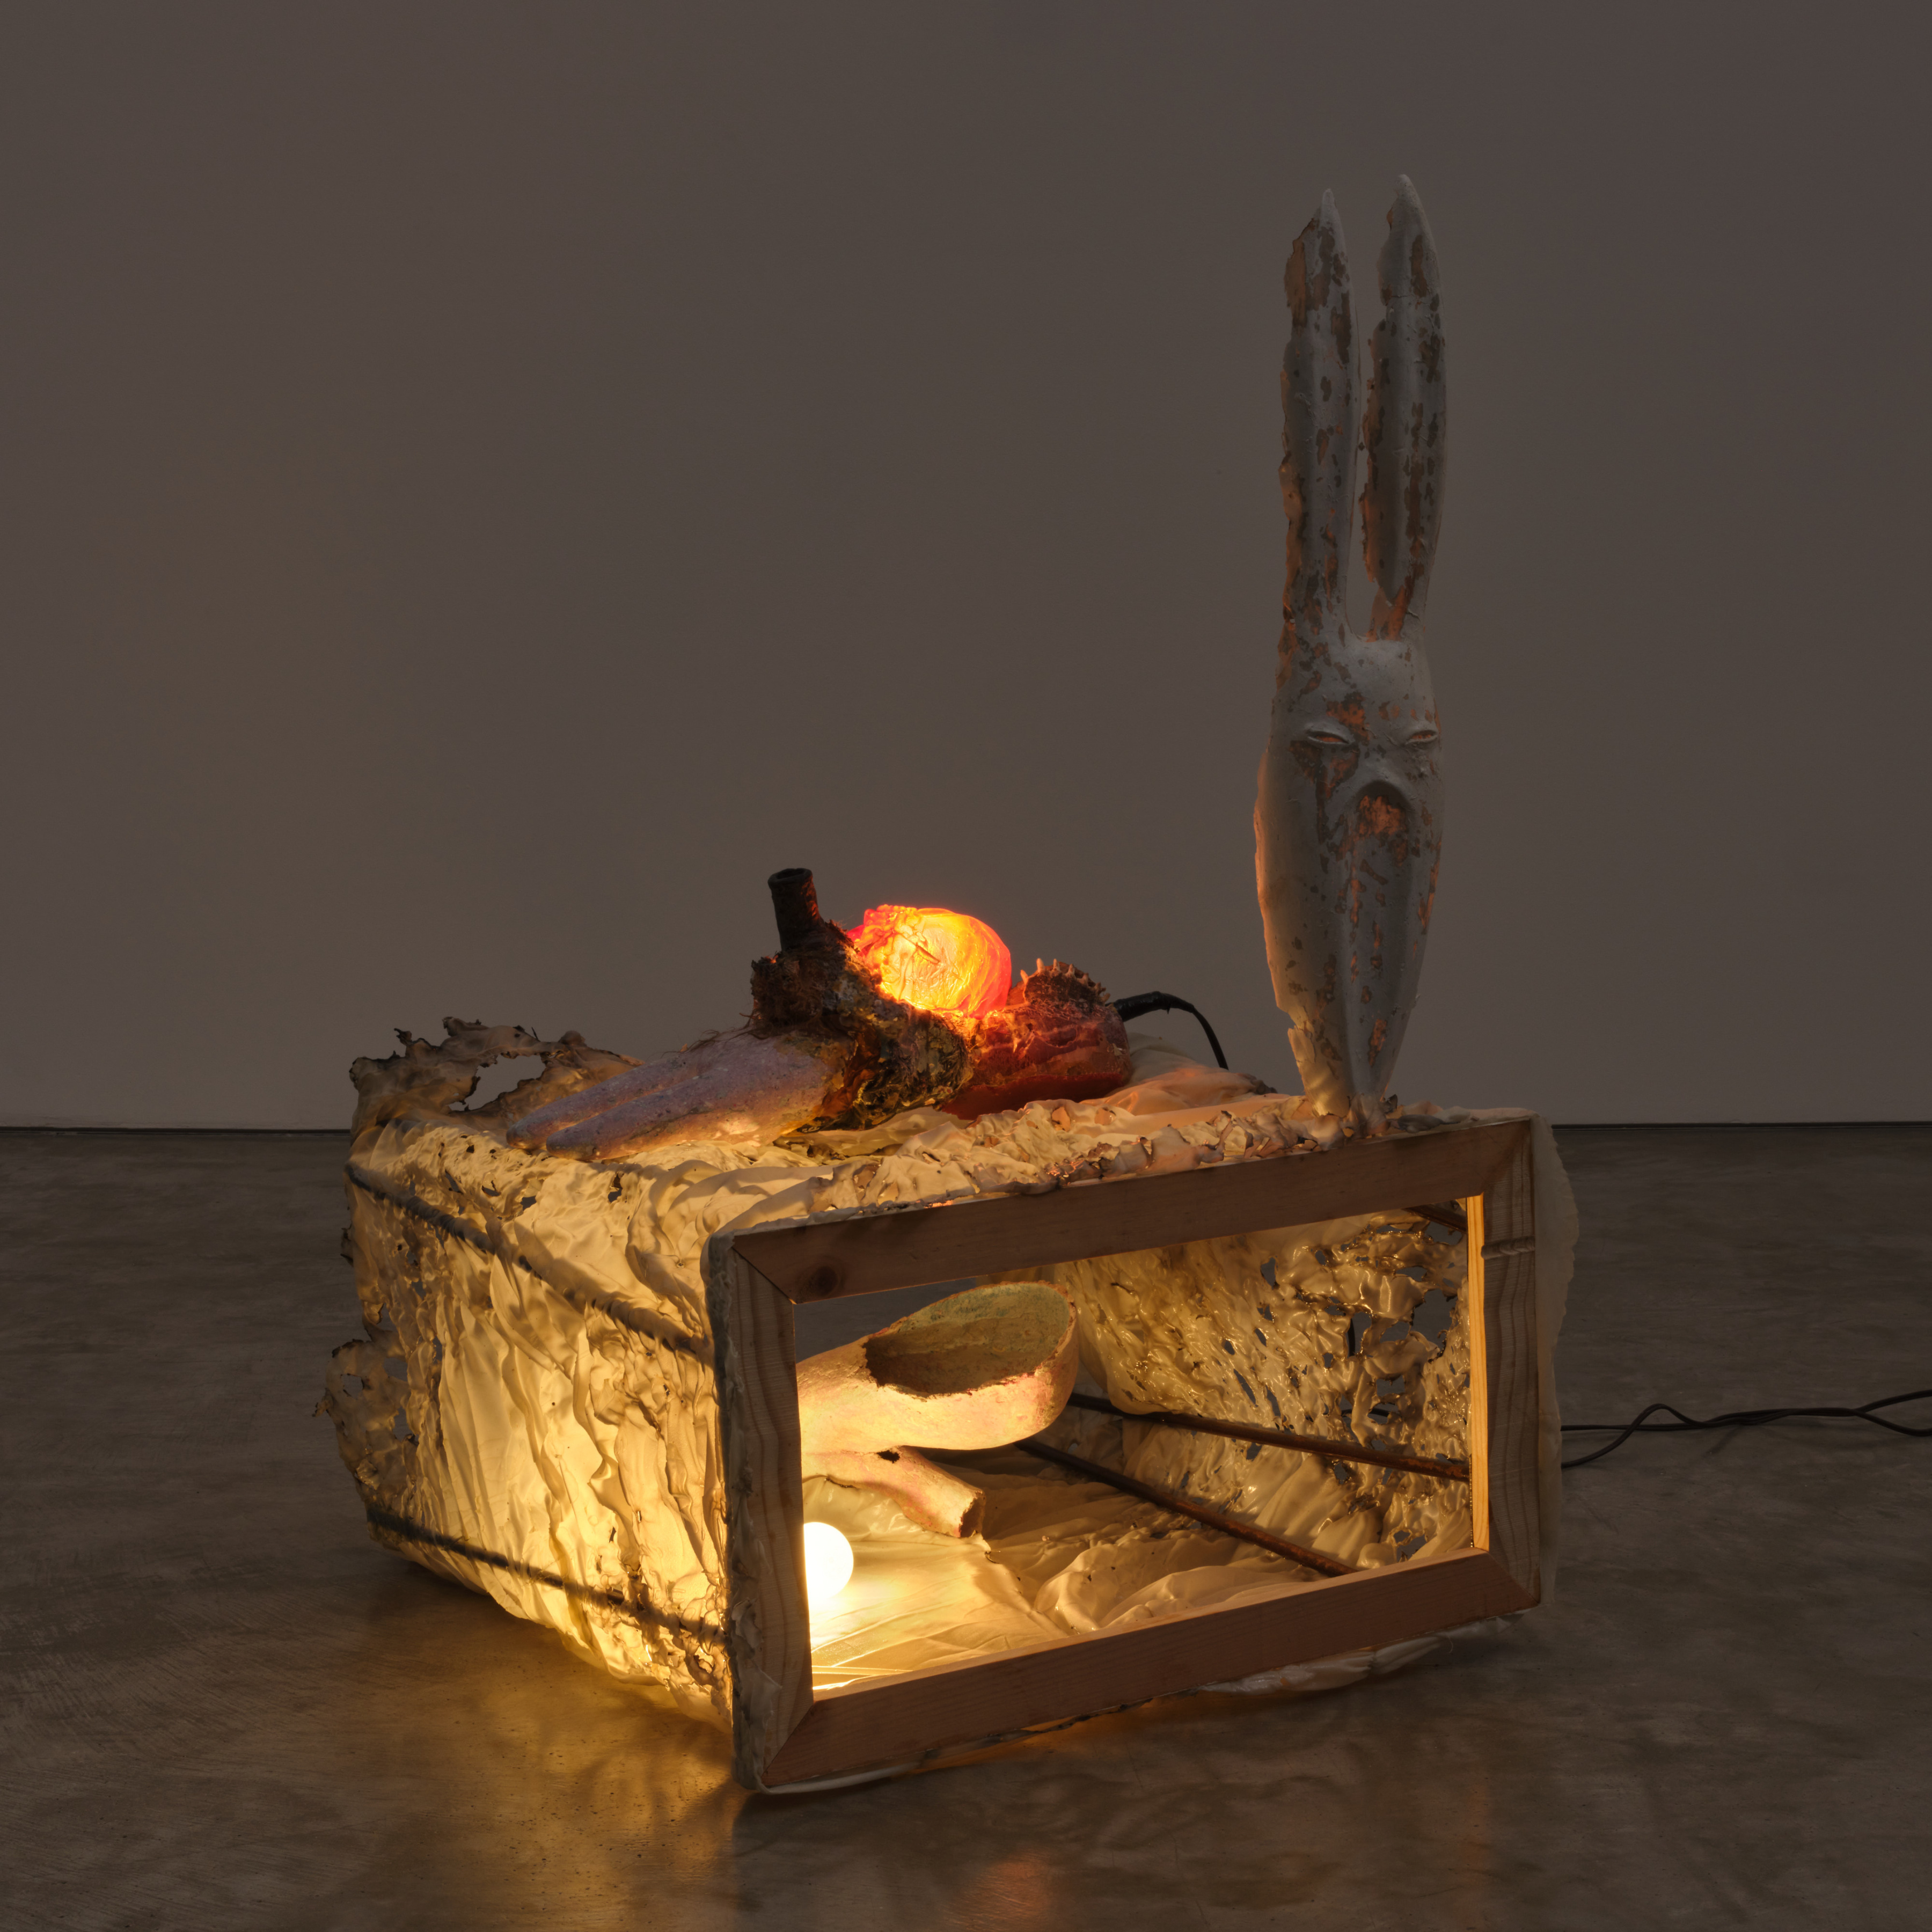 Catalina&amp;nbsp;Ouyang, Happening, 2022
burned fabric, resin, steel, wood, angle grinder, beeswax, found textiles, epoxy clay, wire mesh, plaster, papier mache, light, horse hair, turtle shell
44 7/8 x 31 x 28 3/4 in (114 x 78.7 x 73 cm)

800px